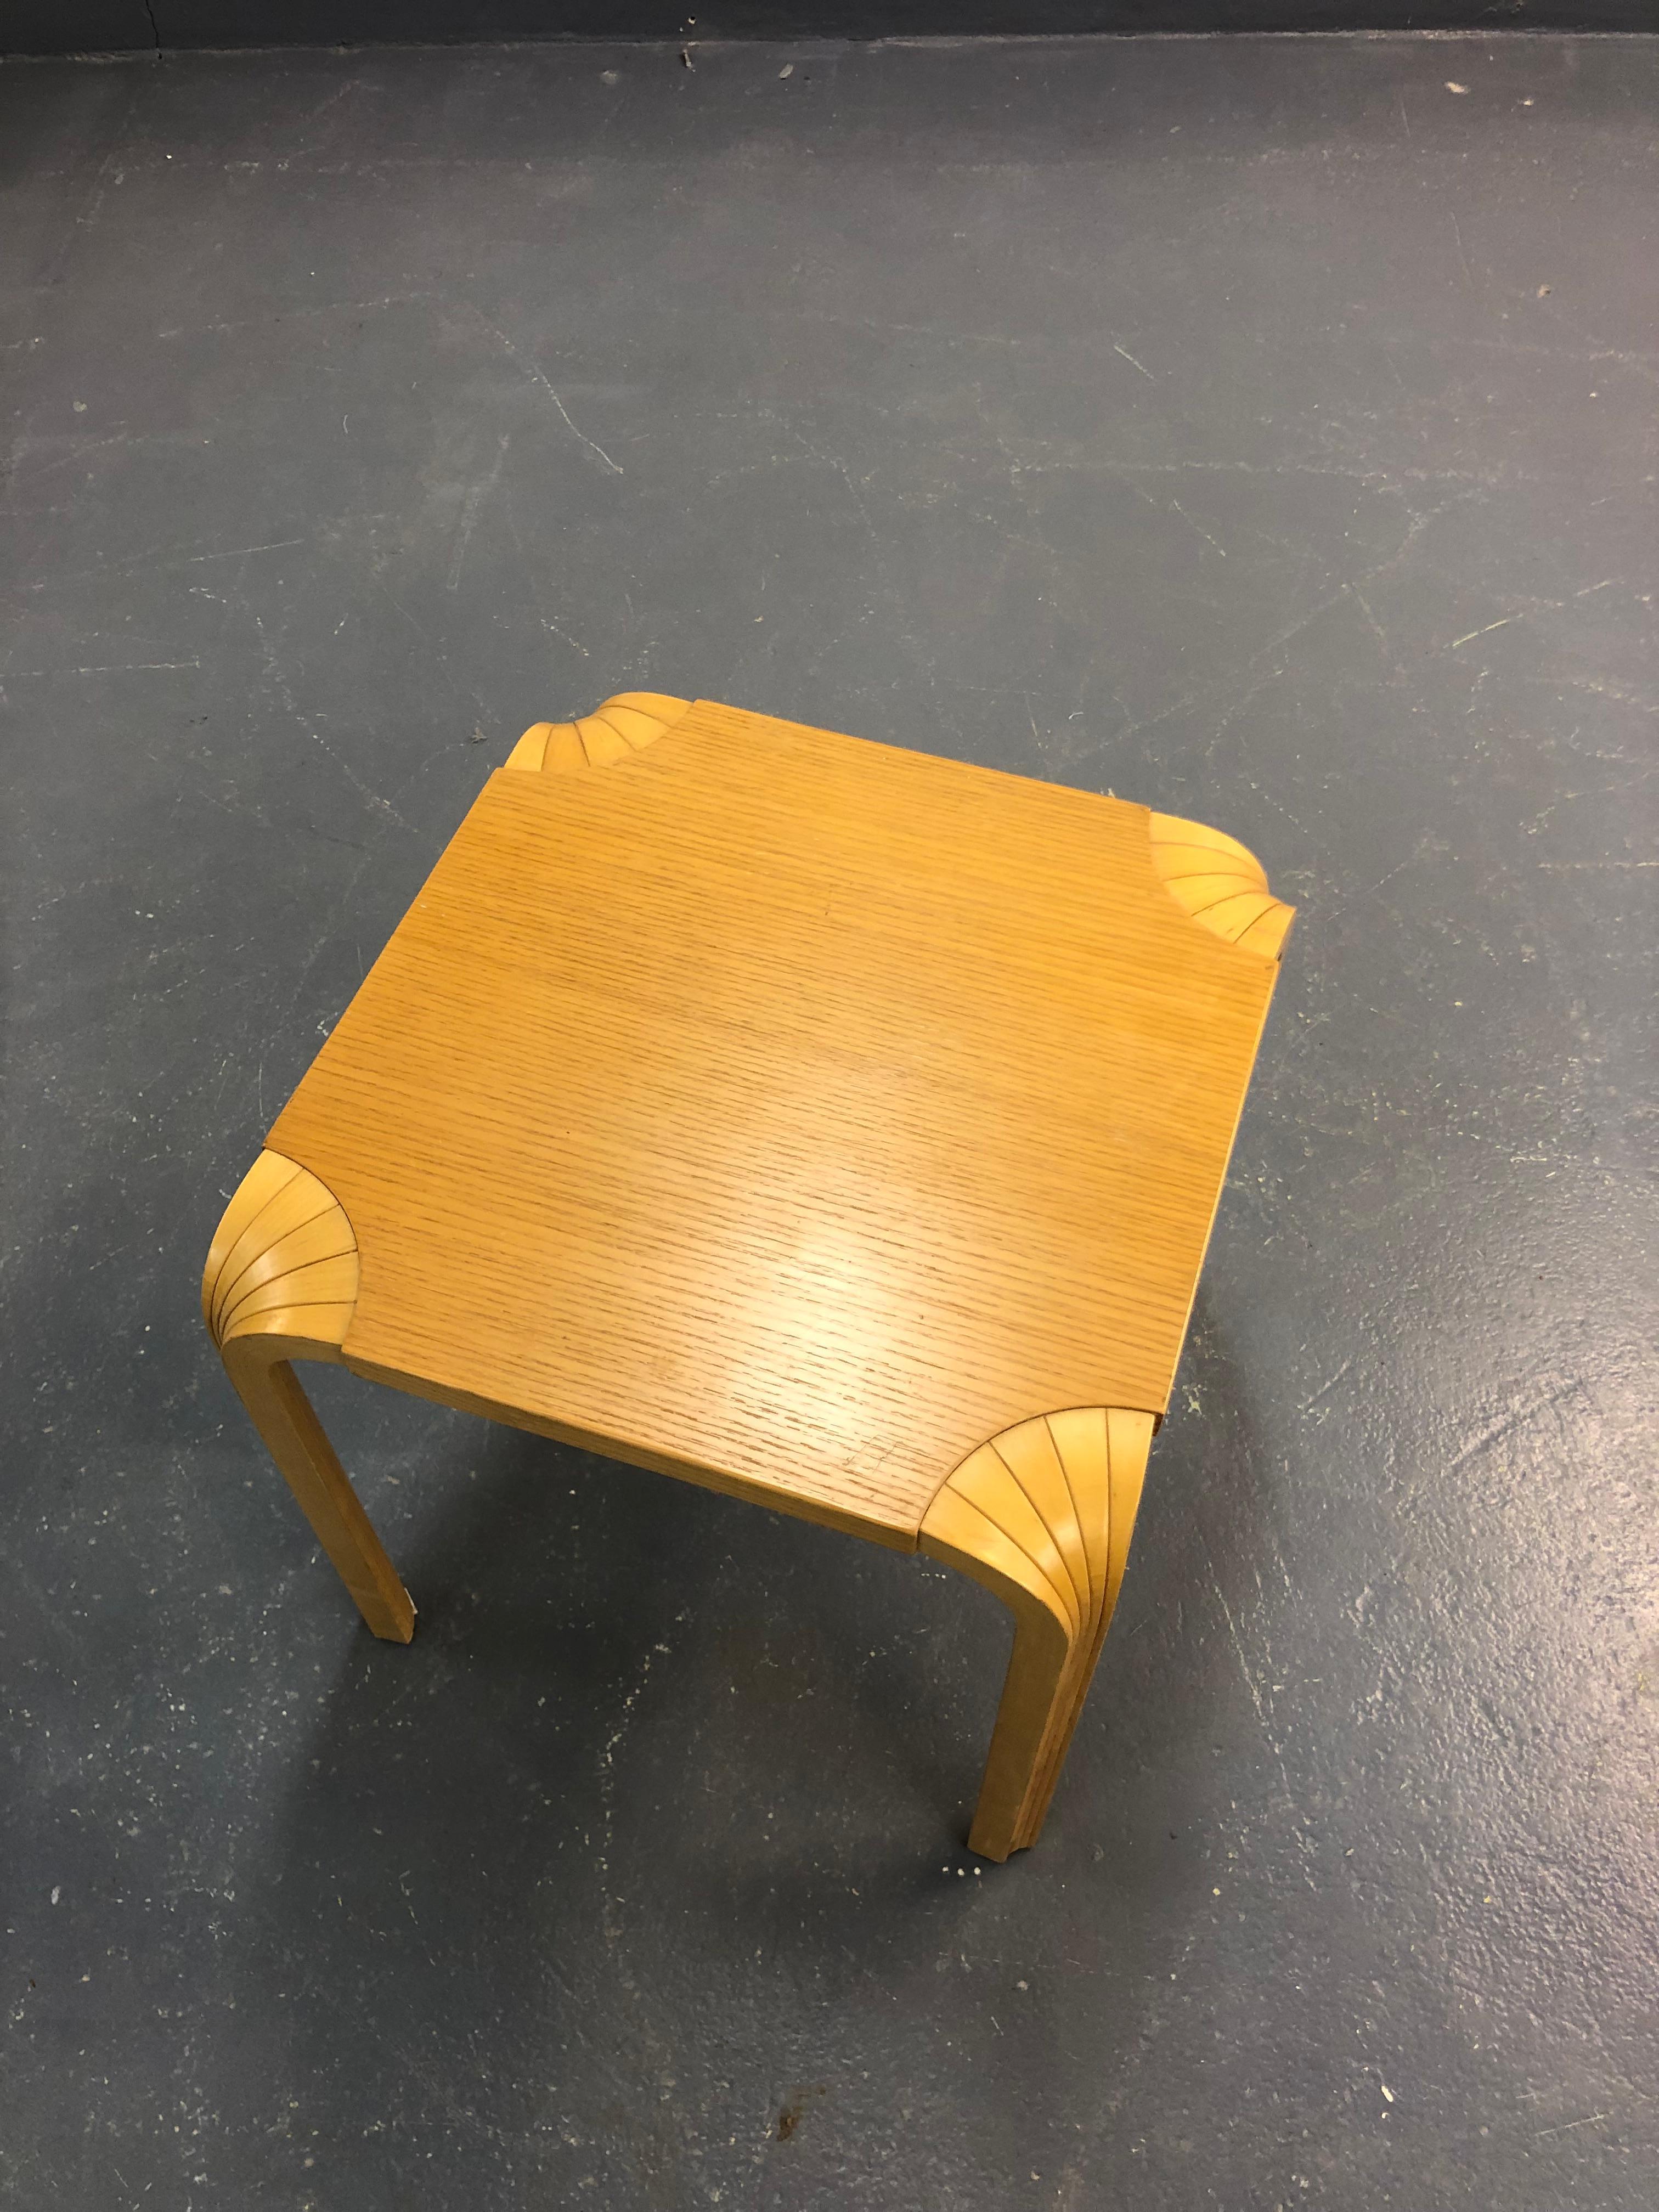 This stool was designed by Alvar Aalto for Artek originally in the 1950s. We have noticed through the years that this stool has been often used as a bed side table. It can also be used as a table or as a flower stand for example. A simple but